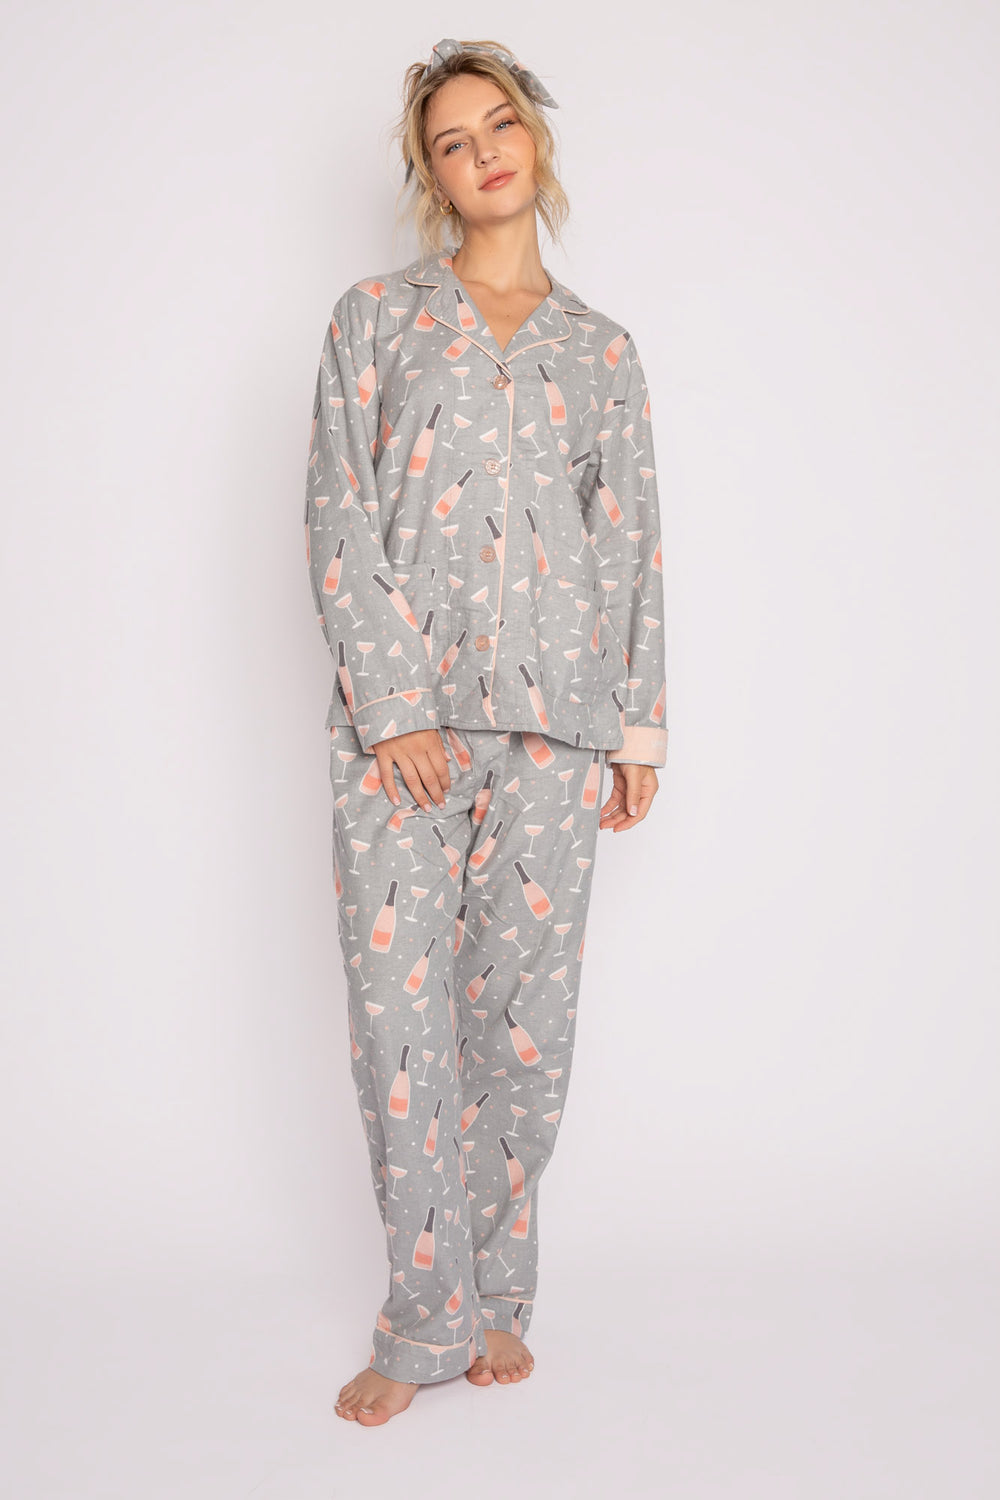 Cotton flannel pj set in silver-pink champagne print. Embroidered 'Sippin' bubbly, feelin' lovely' & hair wrap. (7231869878372)